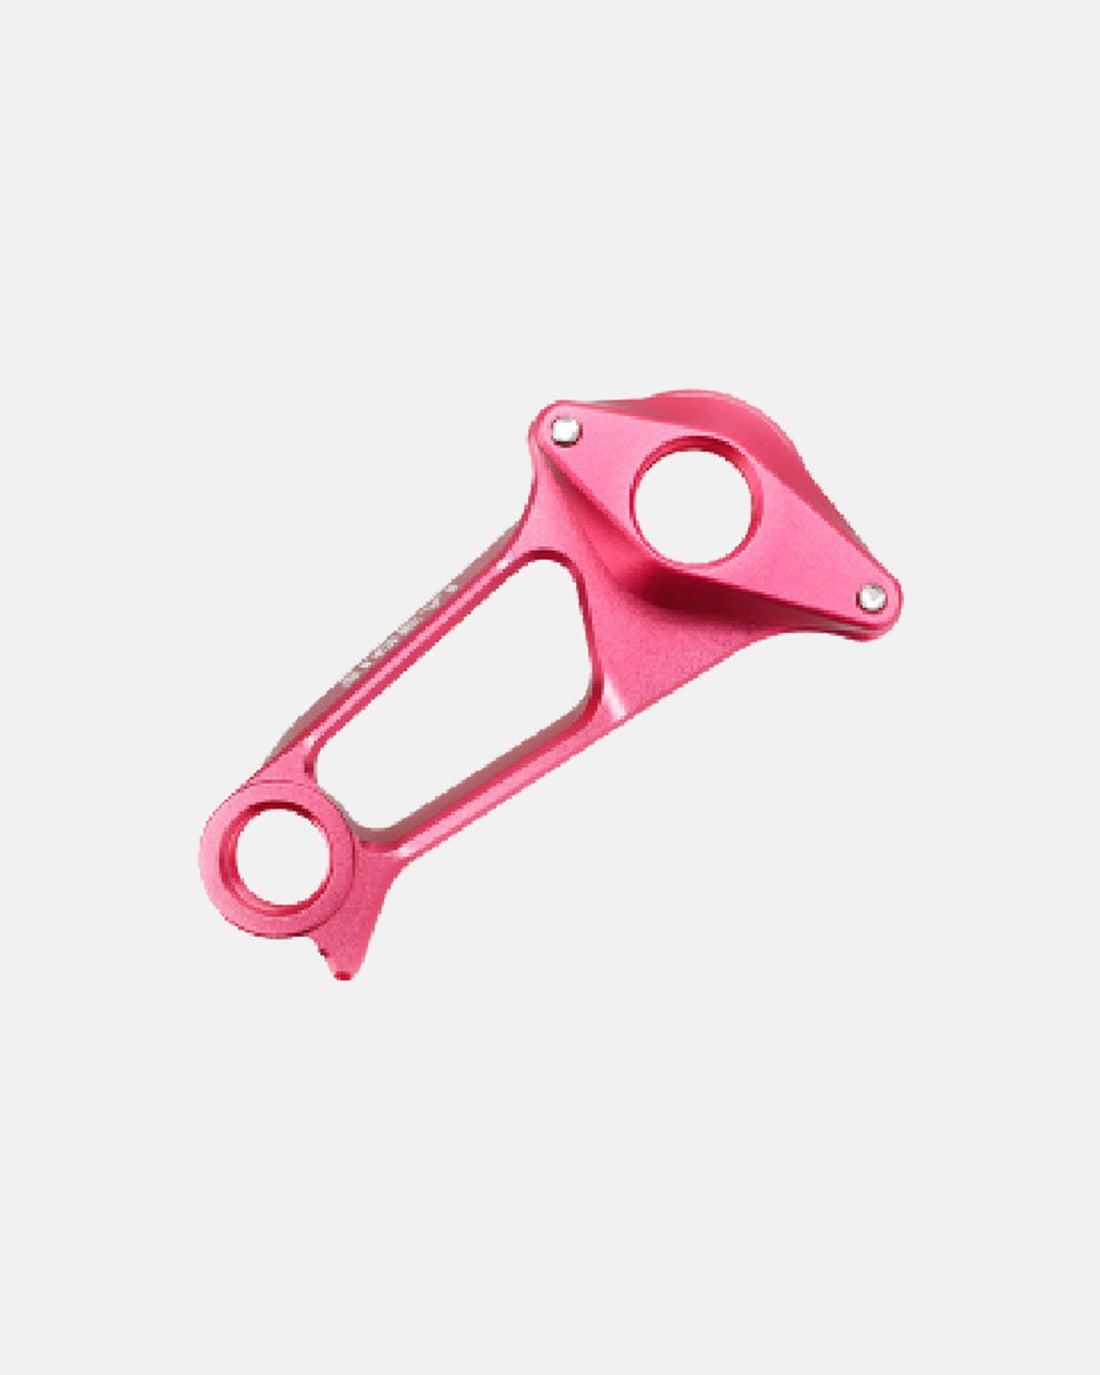 Sigeyi Cannondale Direct-Mount Disc Hanger - Pink